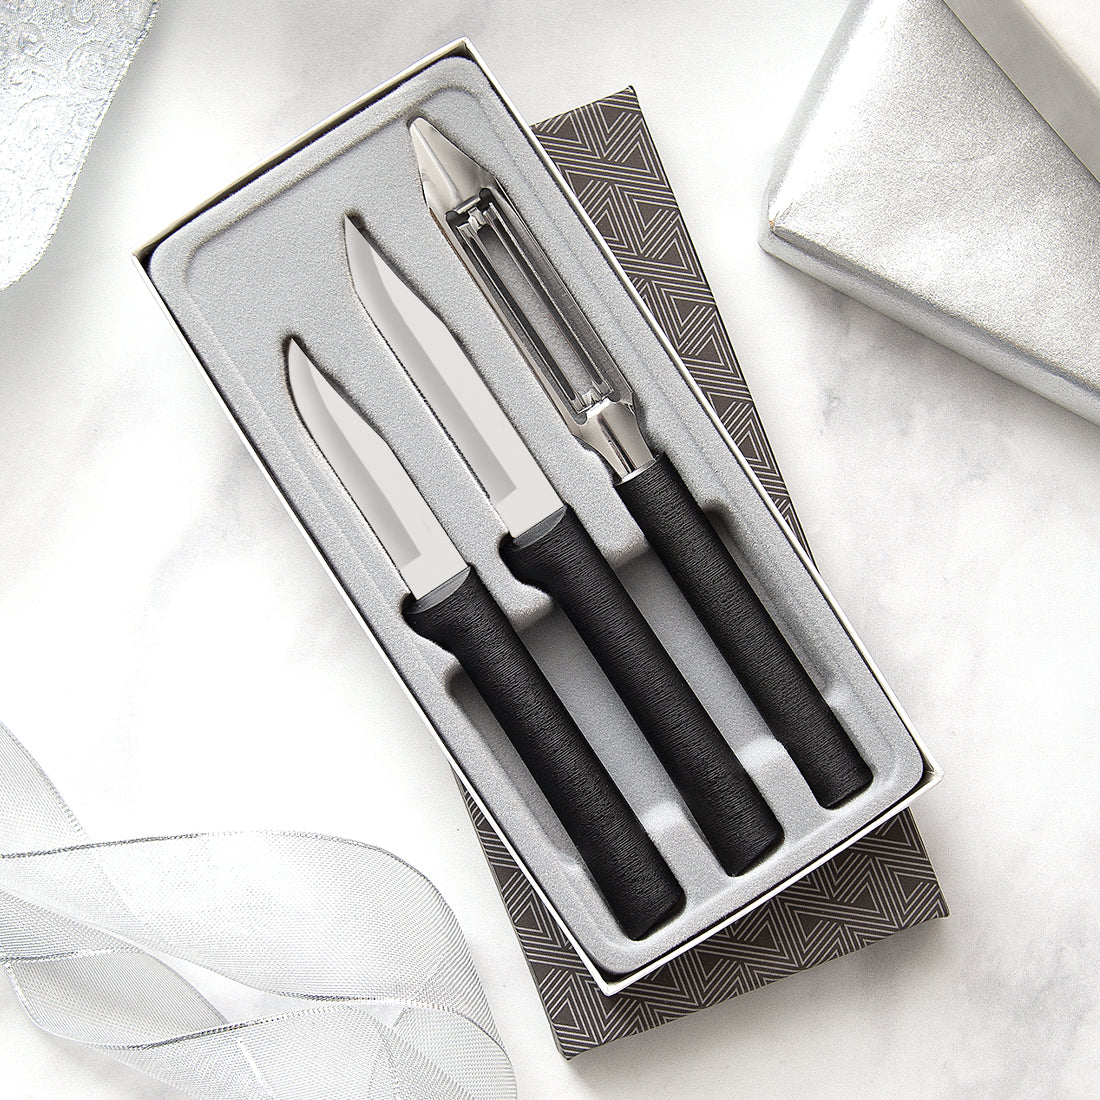 Rada Cutlery Knife 7 Stainless Steel Kitchen Knives Starter Gift Set with  Brushed Aluminum Made in USA, Silver Handle - Gently Sustainable Homestead